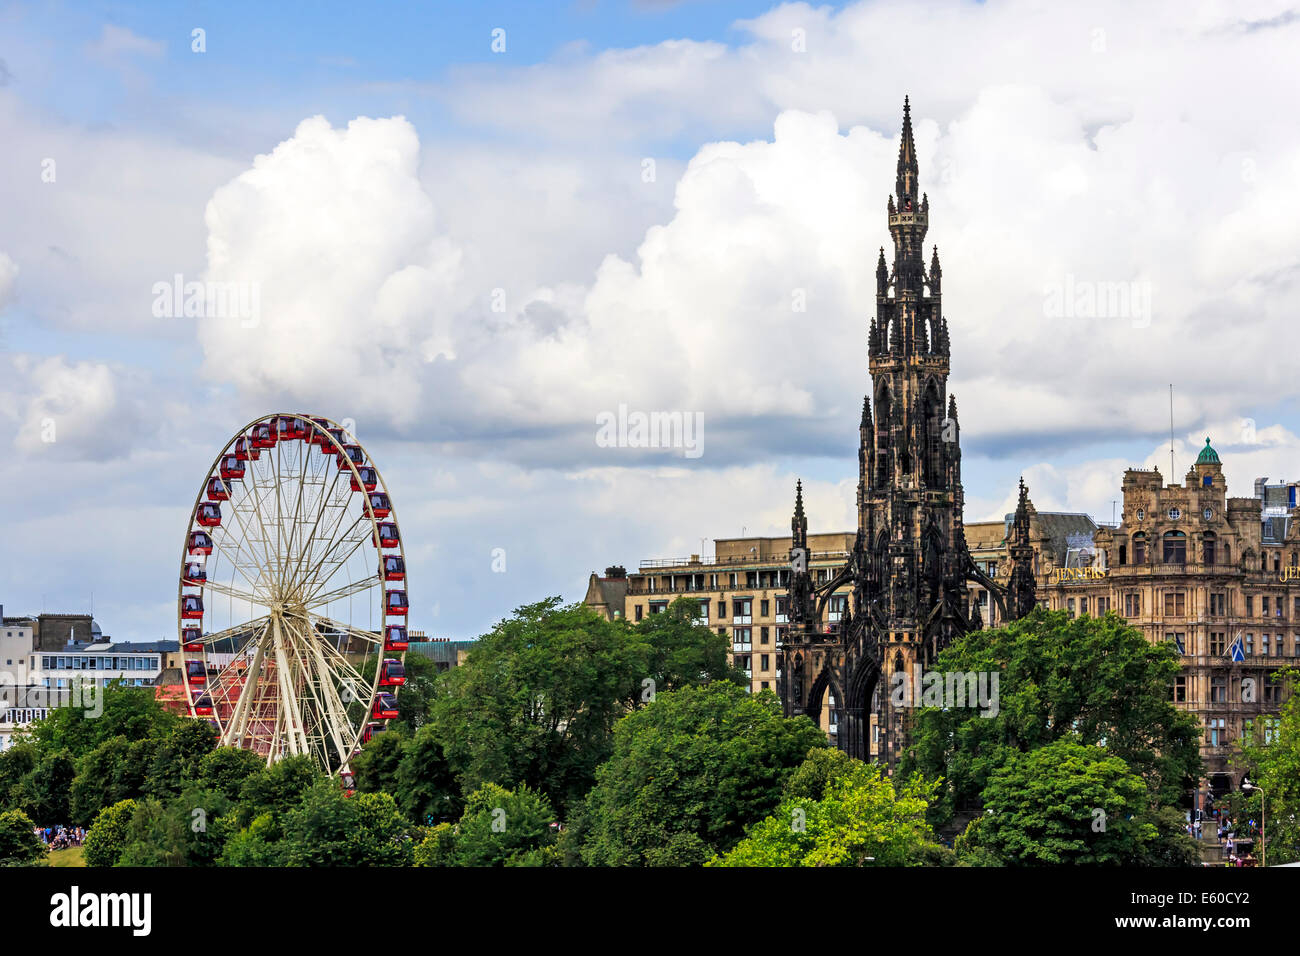 View towards Princes Street gardens with the Scott monument and the wheel of the nearby funfair, Edinburgh, Scotland, UK Stock Photo